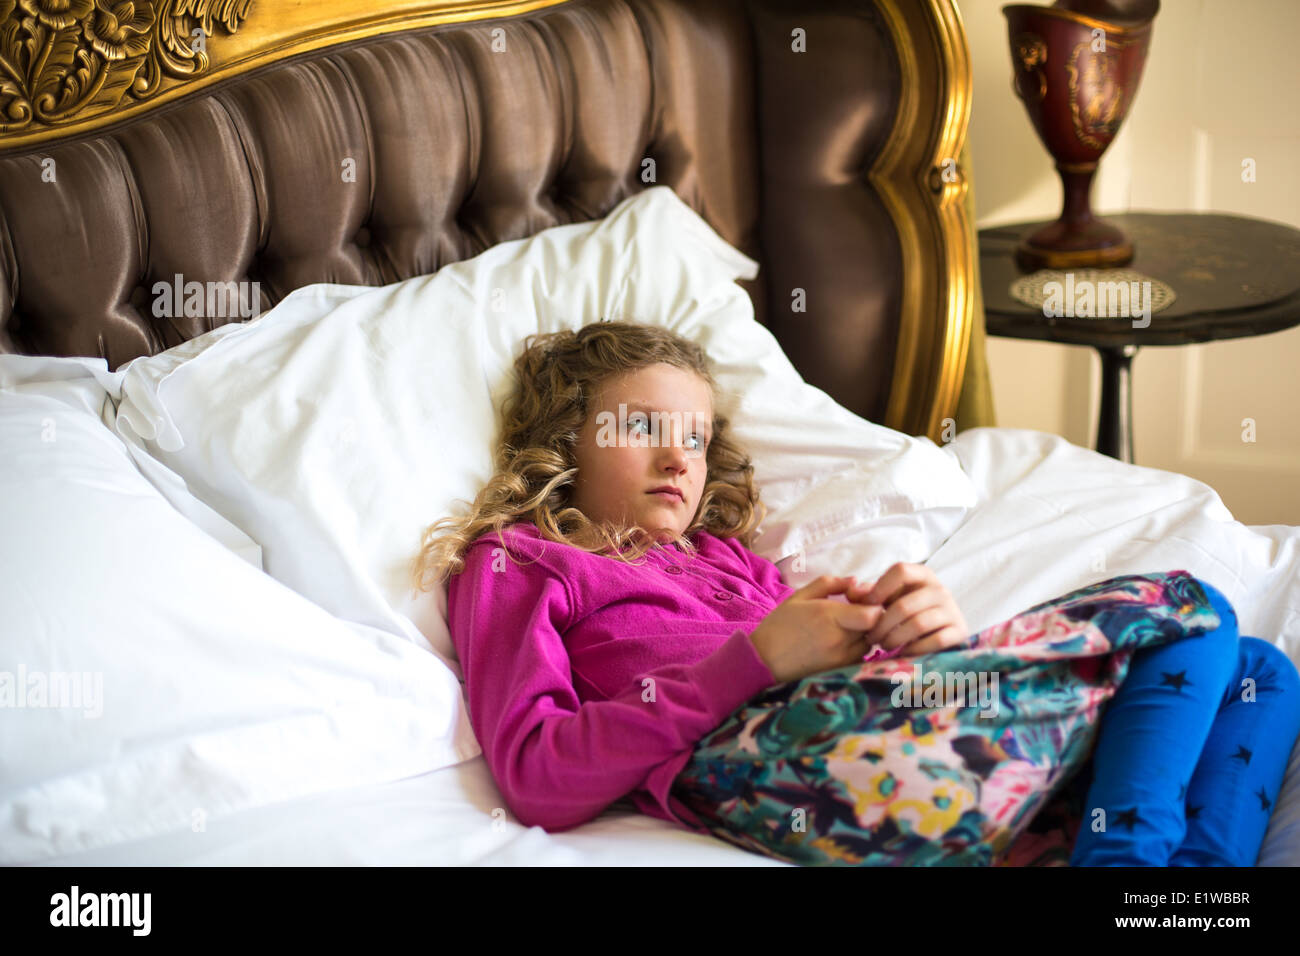 A young girl lying on a Bed Stock Photo